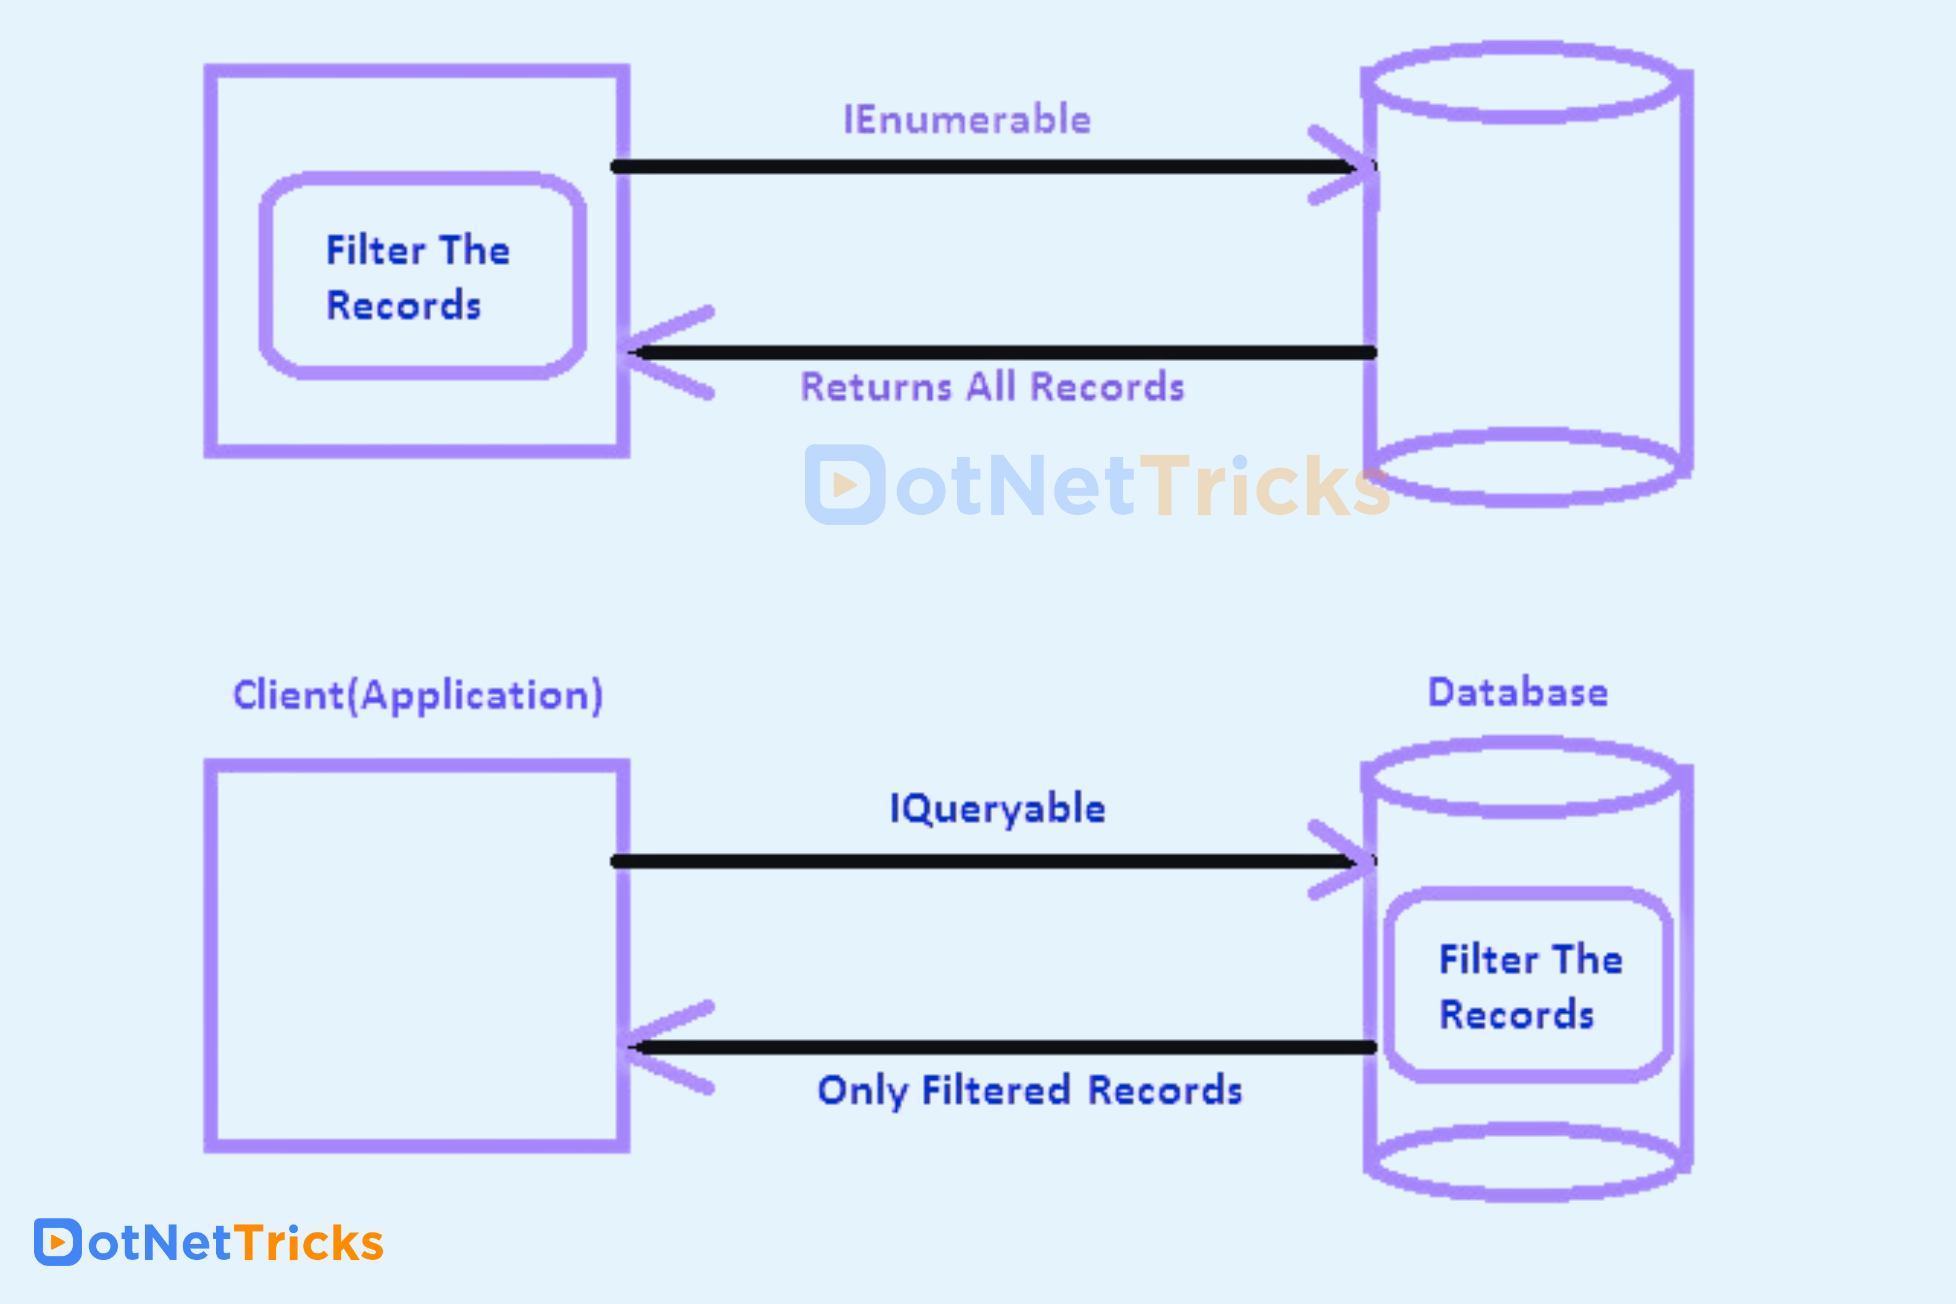  difference between IEnumerable and IQueryable